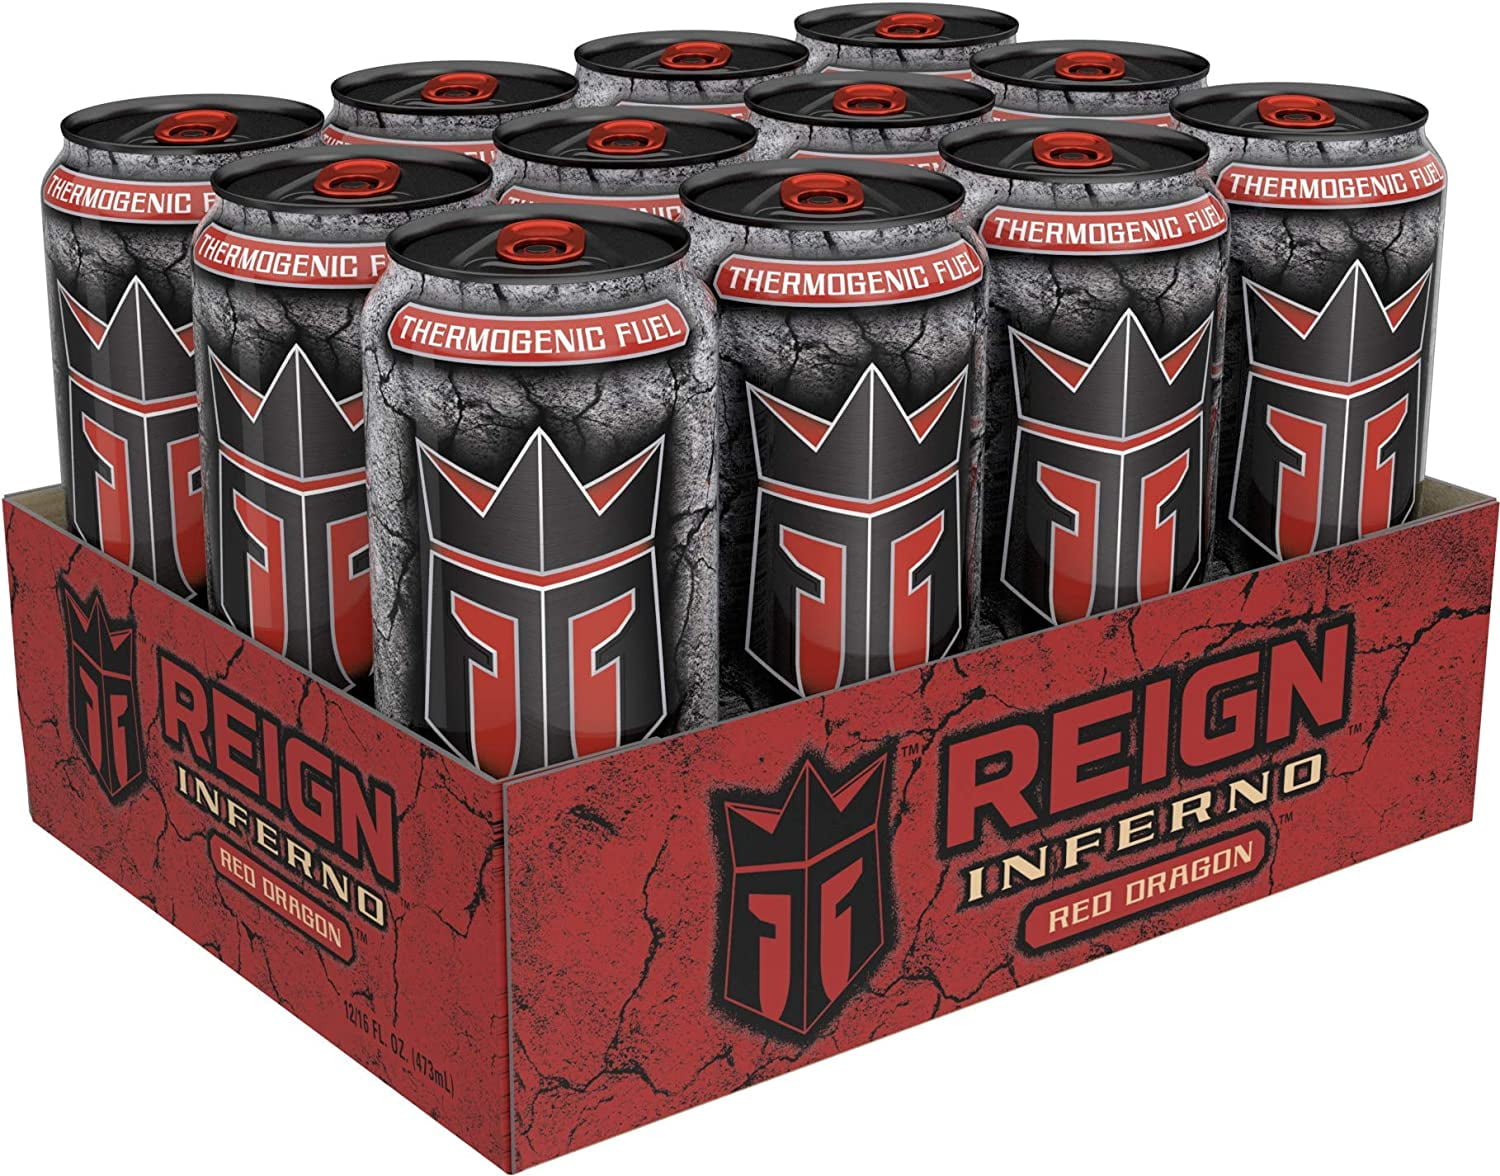 Fitness and Performance Drink Thermogenic Fuel 16 Ou Reign Inferno 